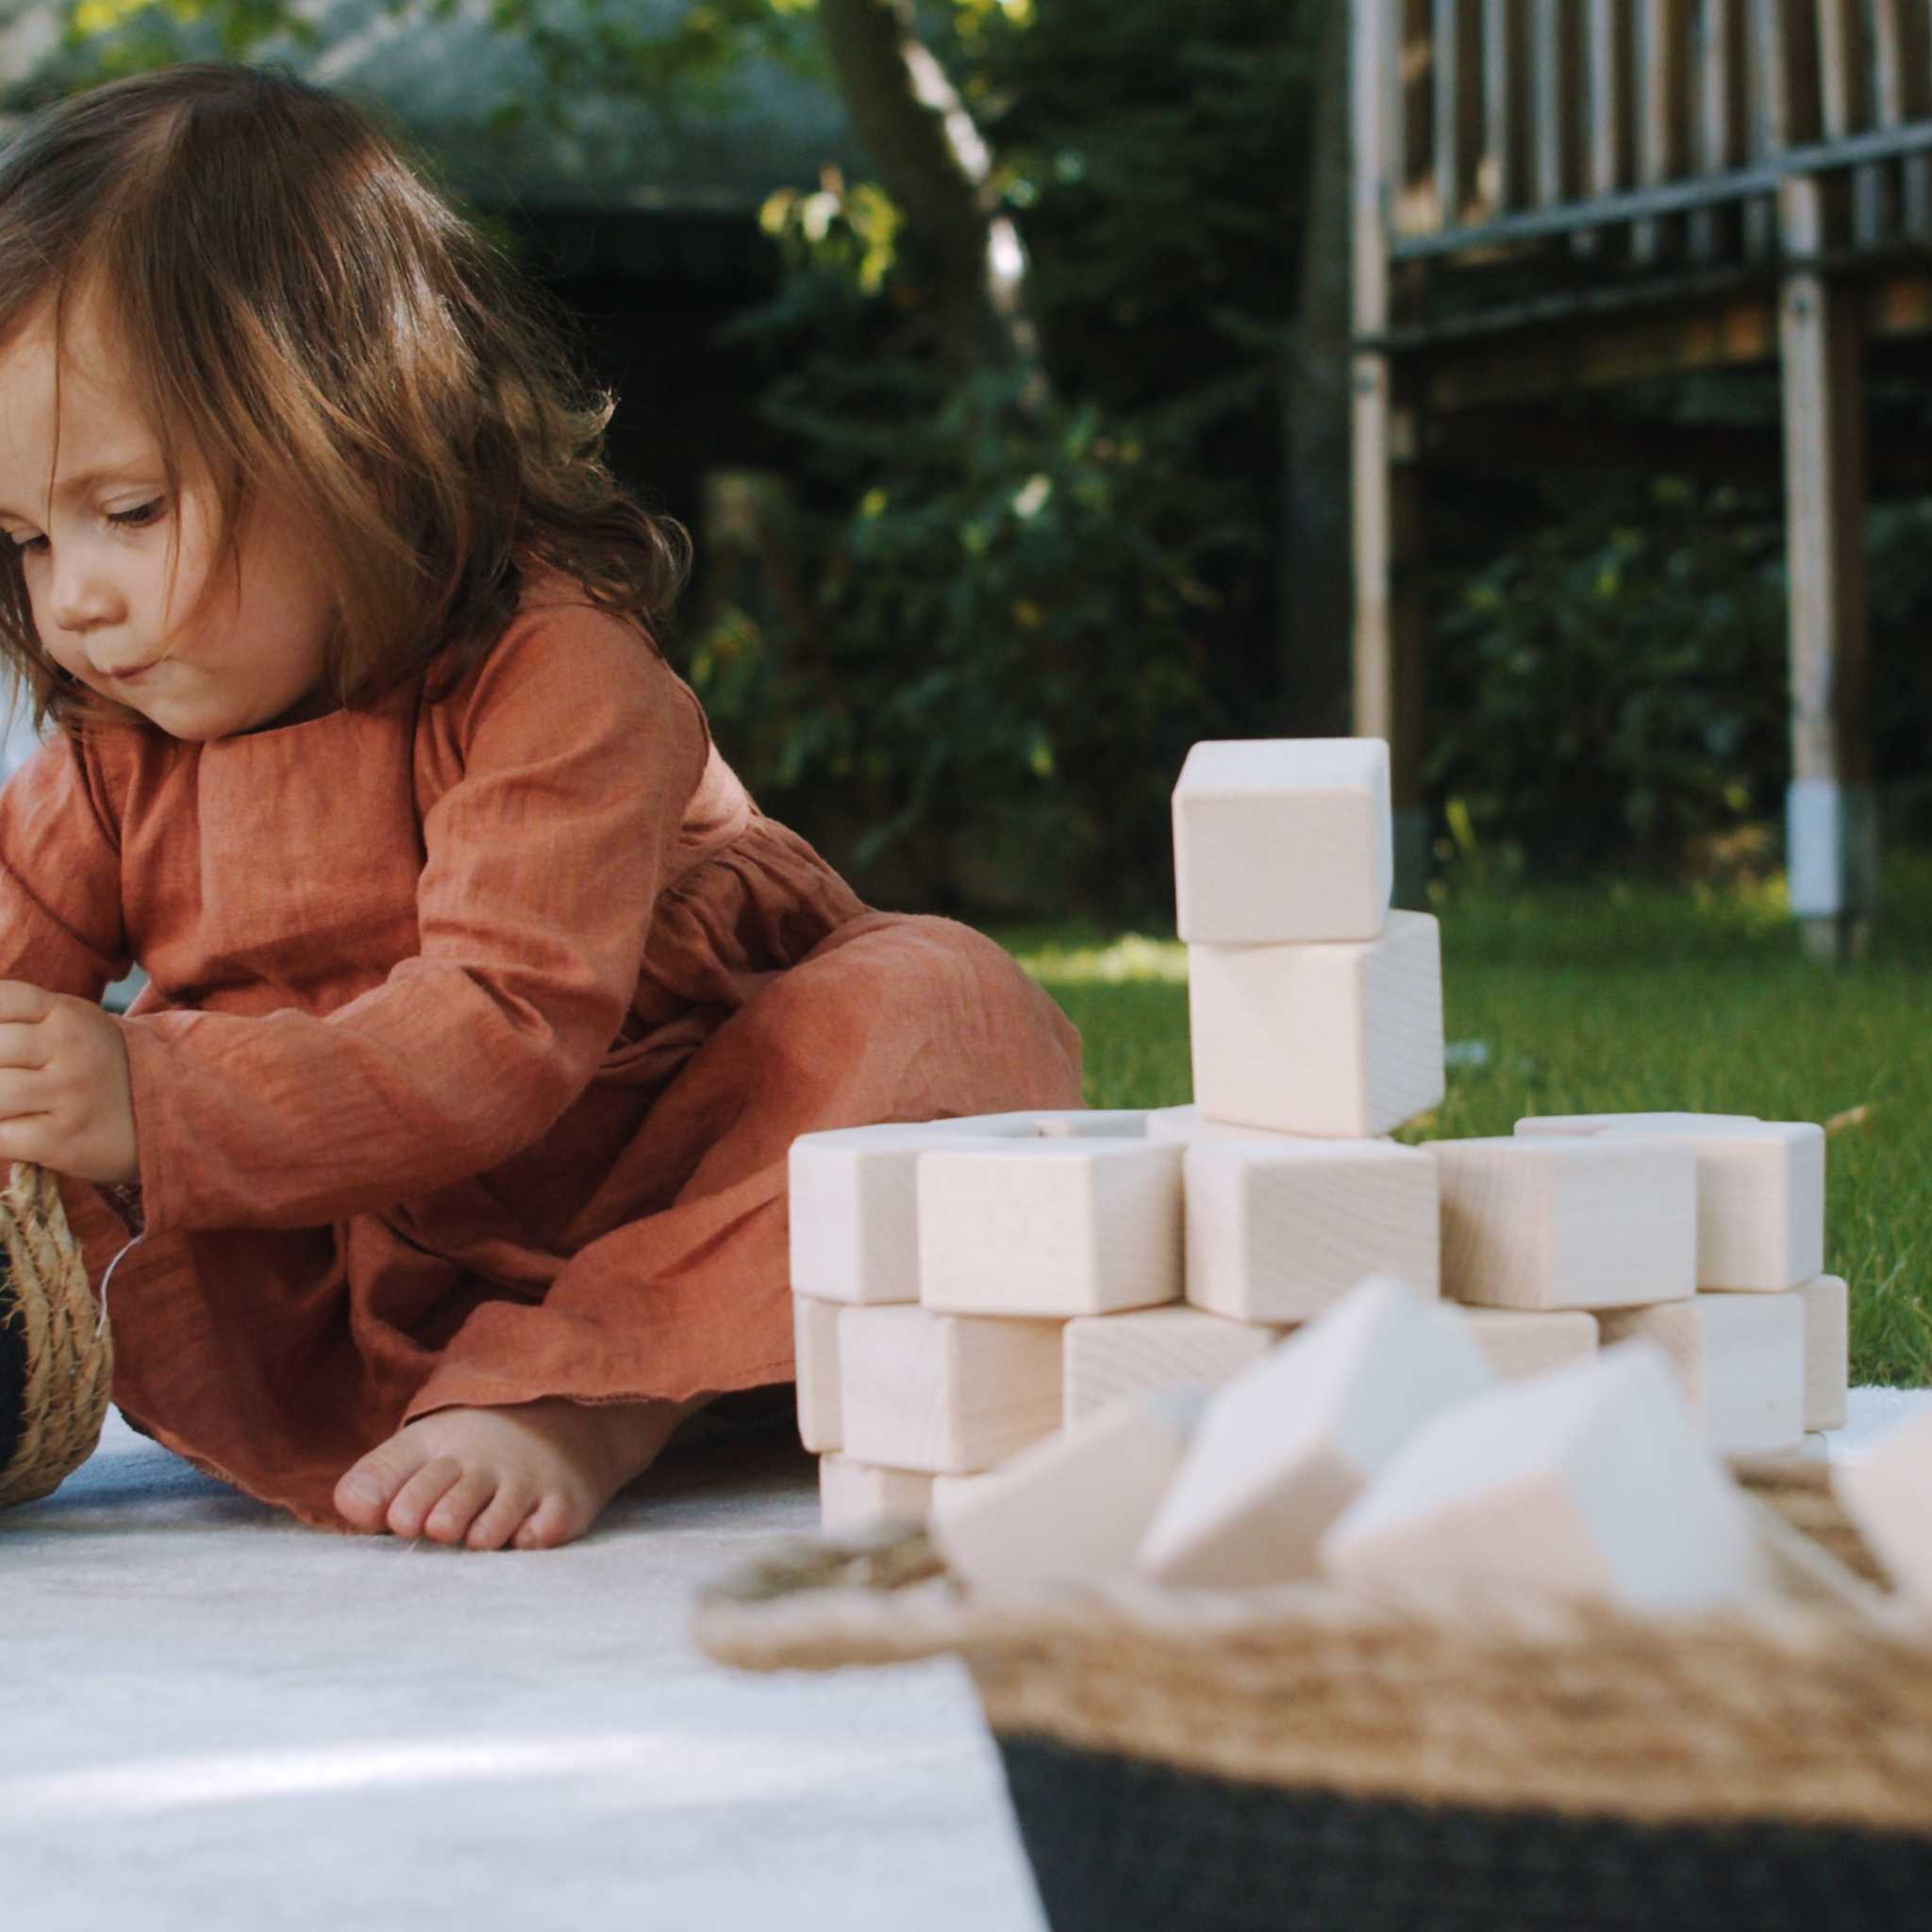 Little Girl Playing With Just Blocks Baby Set In Garden